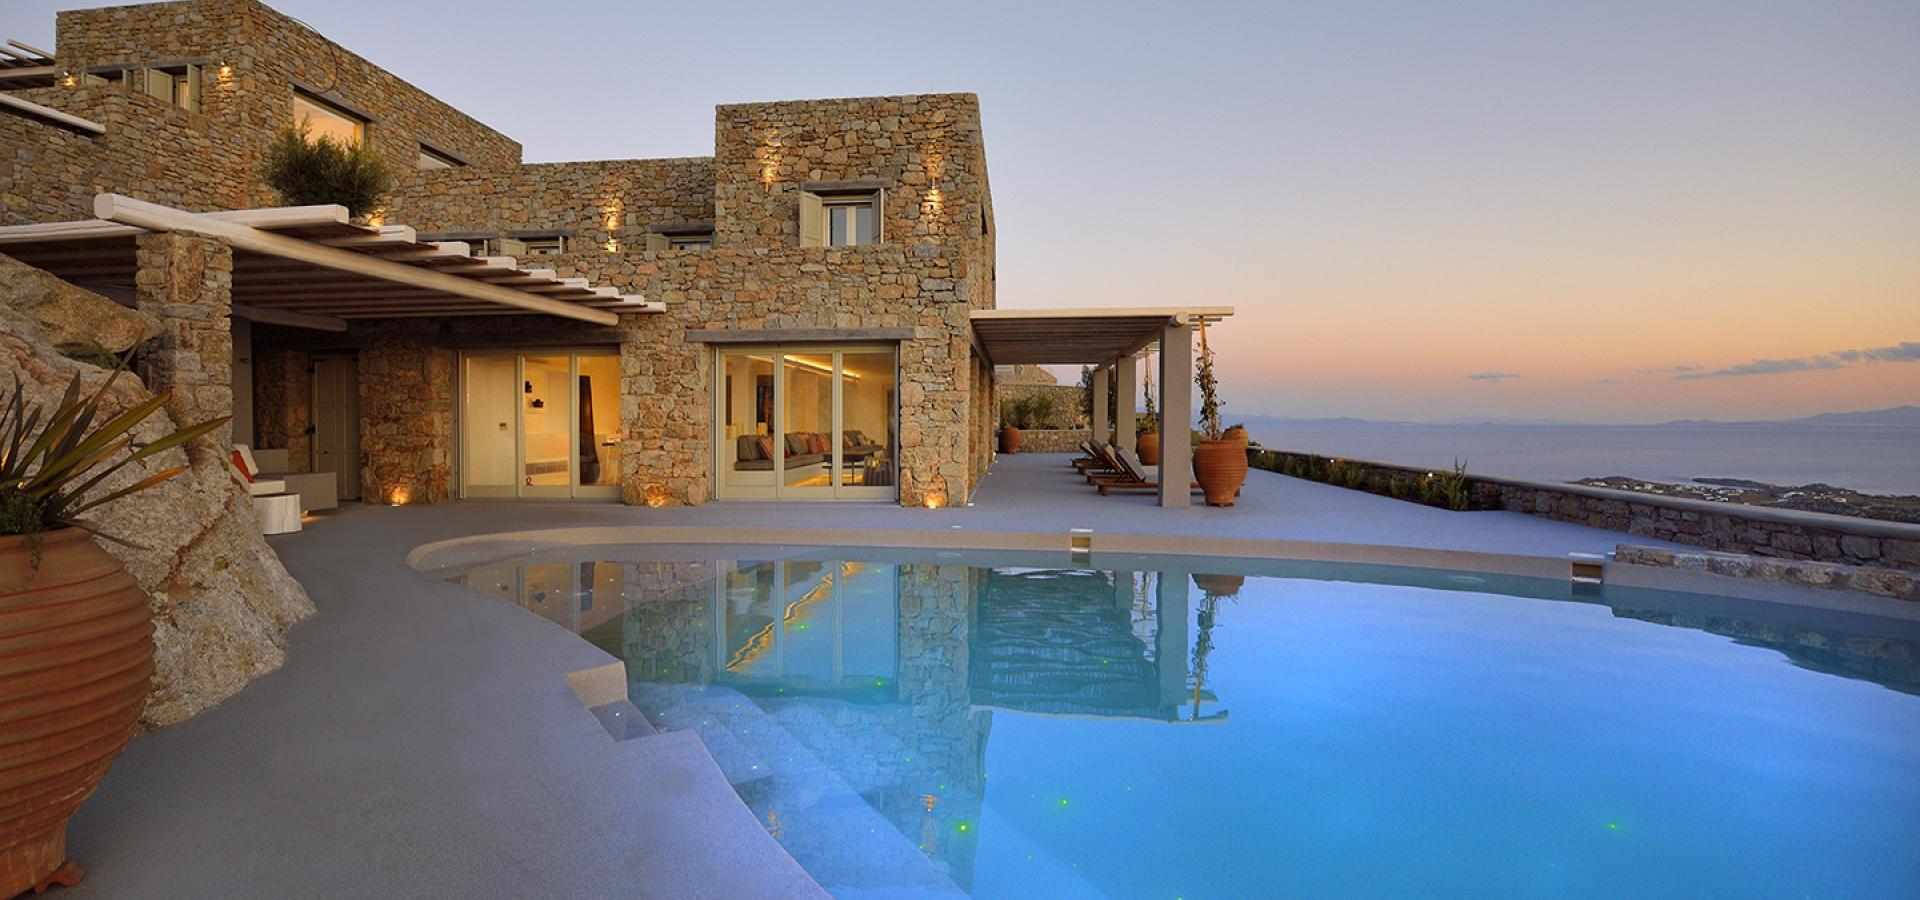 villa and pool area at sunset